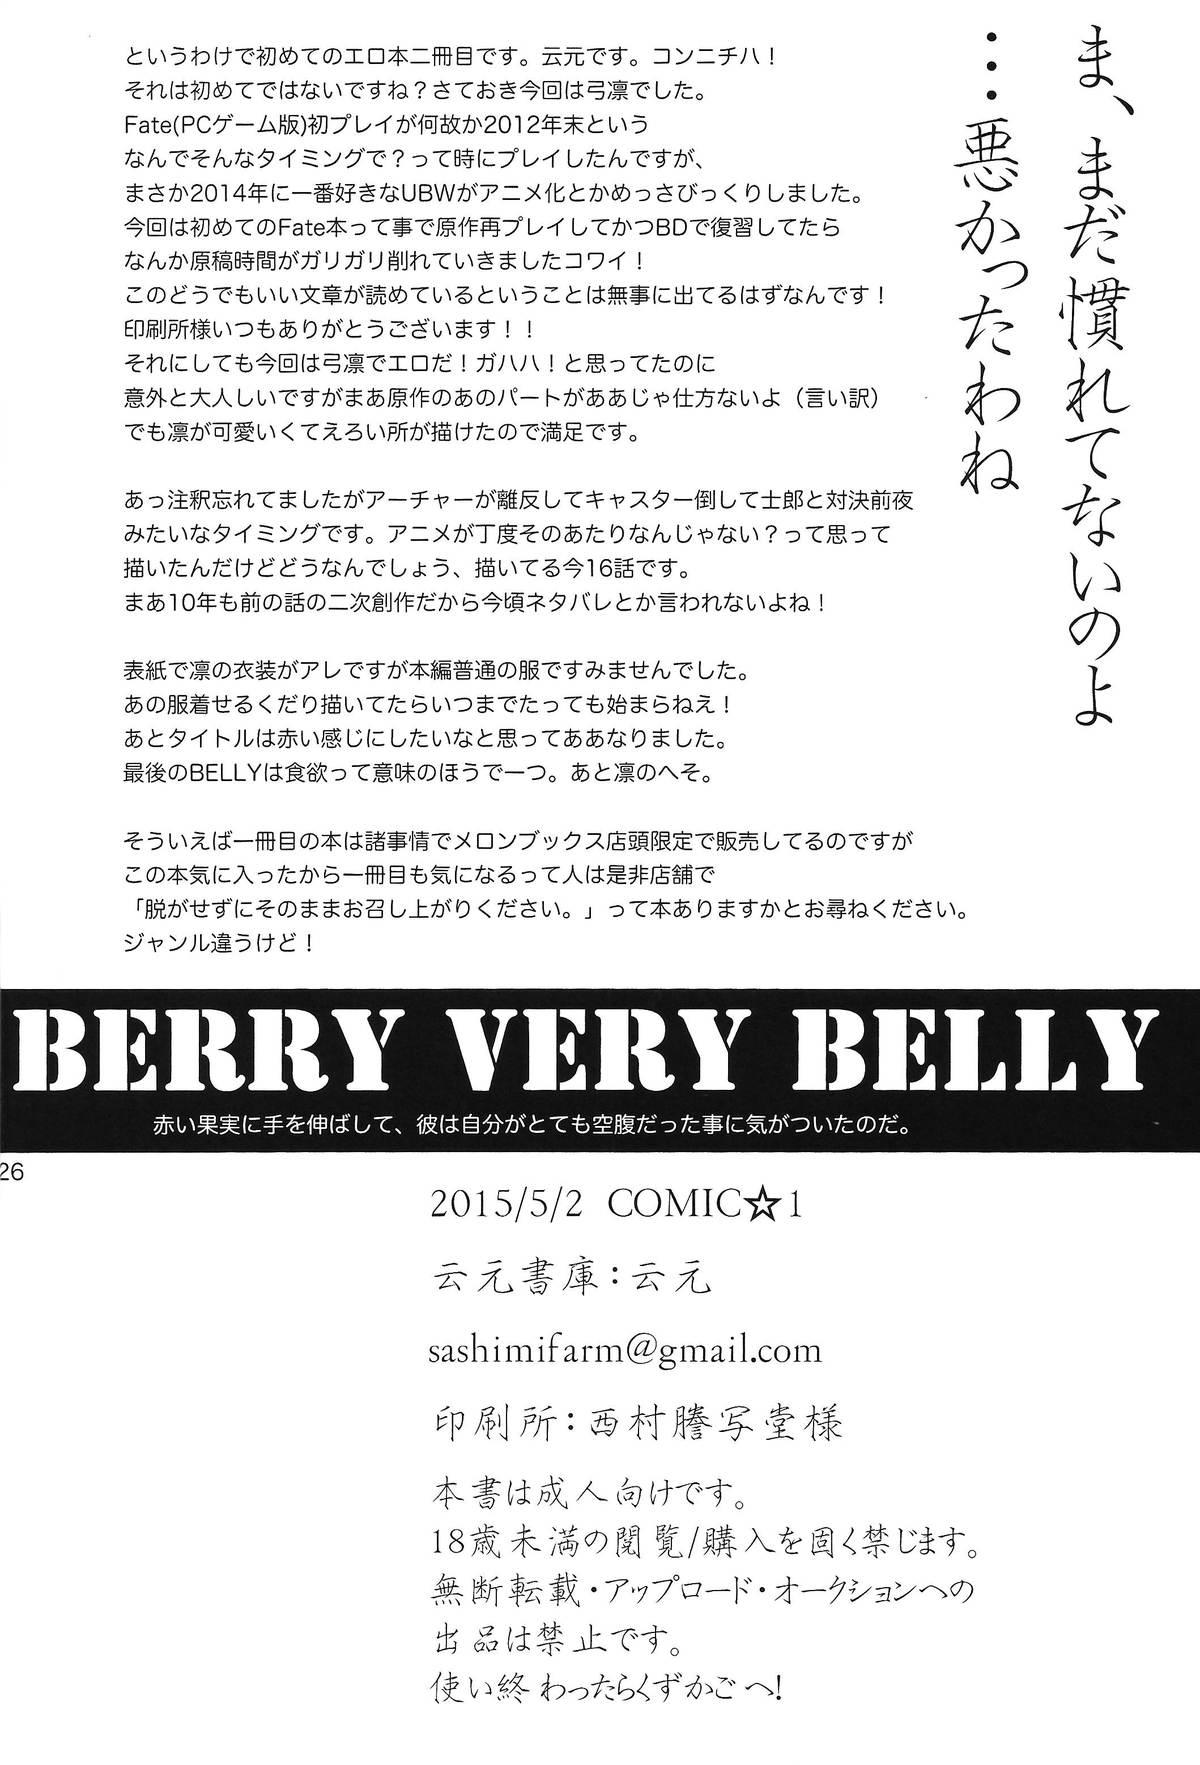 Freeporn BERRY VERY BELLY - Fate stay night Adorable - Page 24